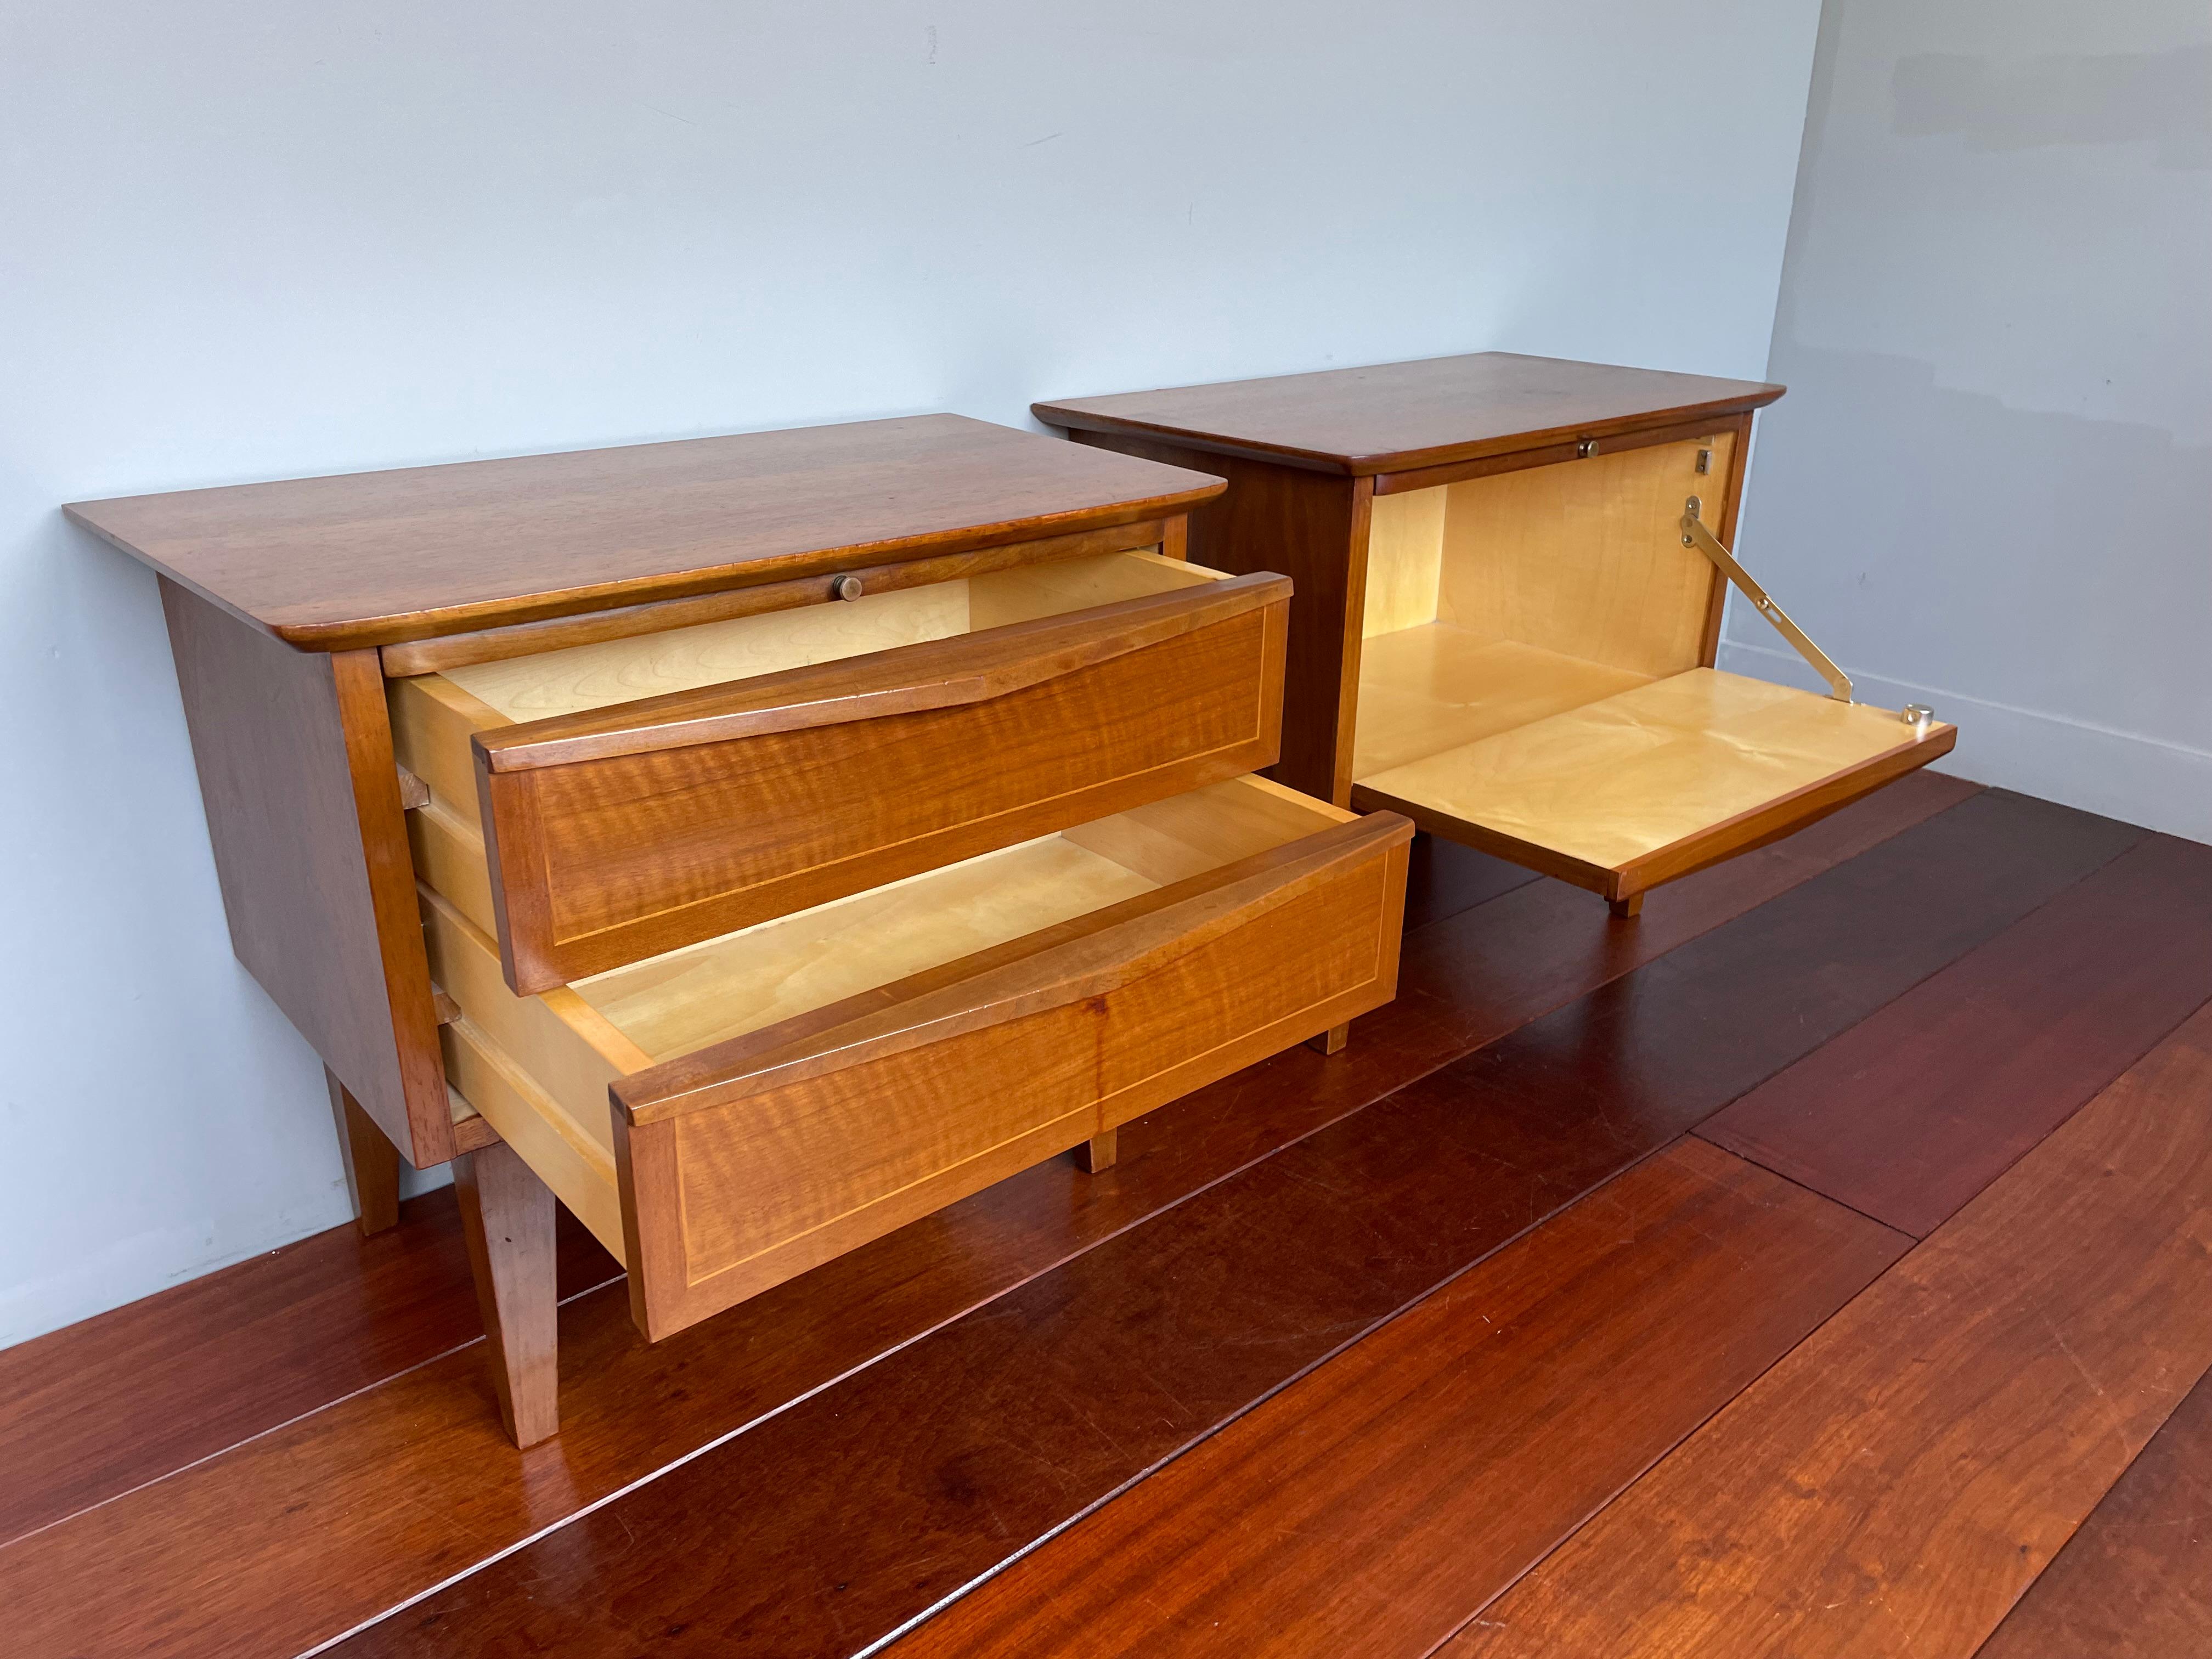 Hand-Crafted Beautiful & Rare Pair Of Handmade Midcentury Modern Nightstands / Bedside Tables